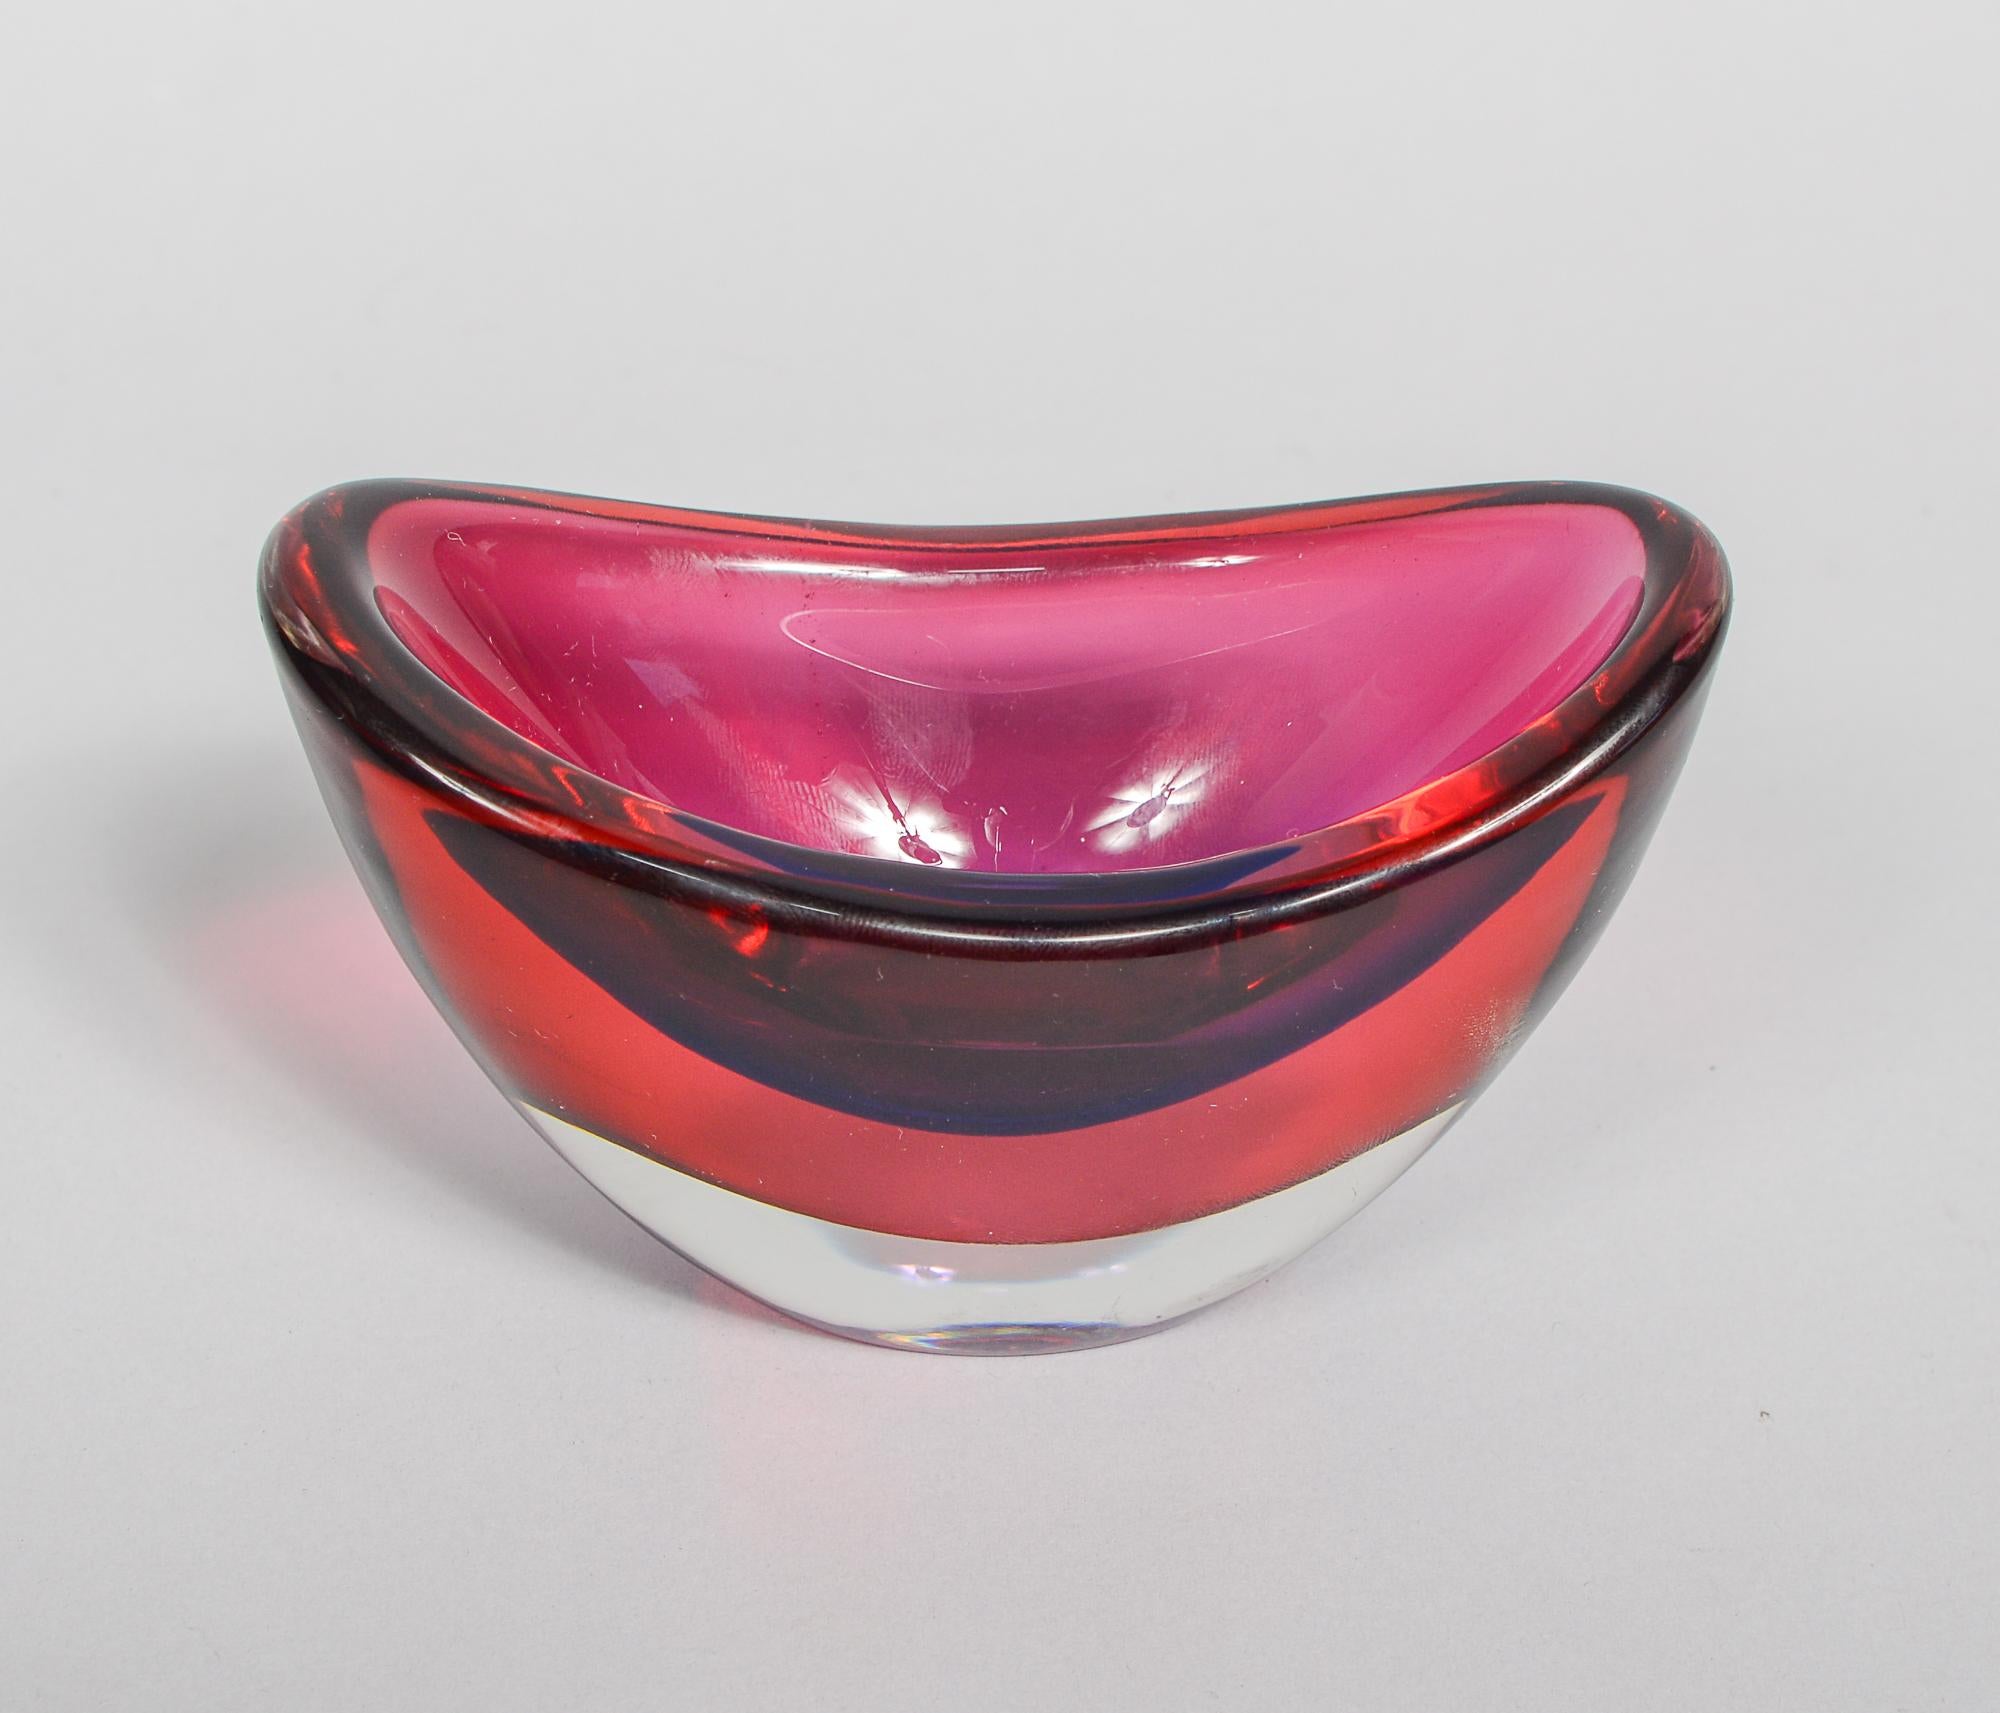 Small Murano sommerso vase designed by Flavio Poli. The vase is clear, red and violet one of the nicer color combinations of this series.